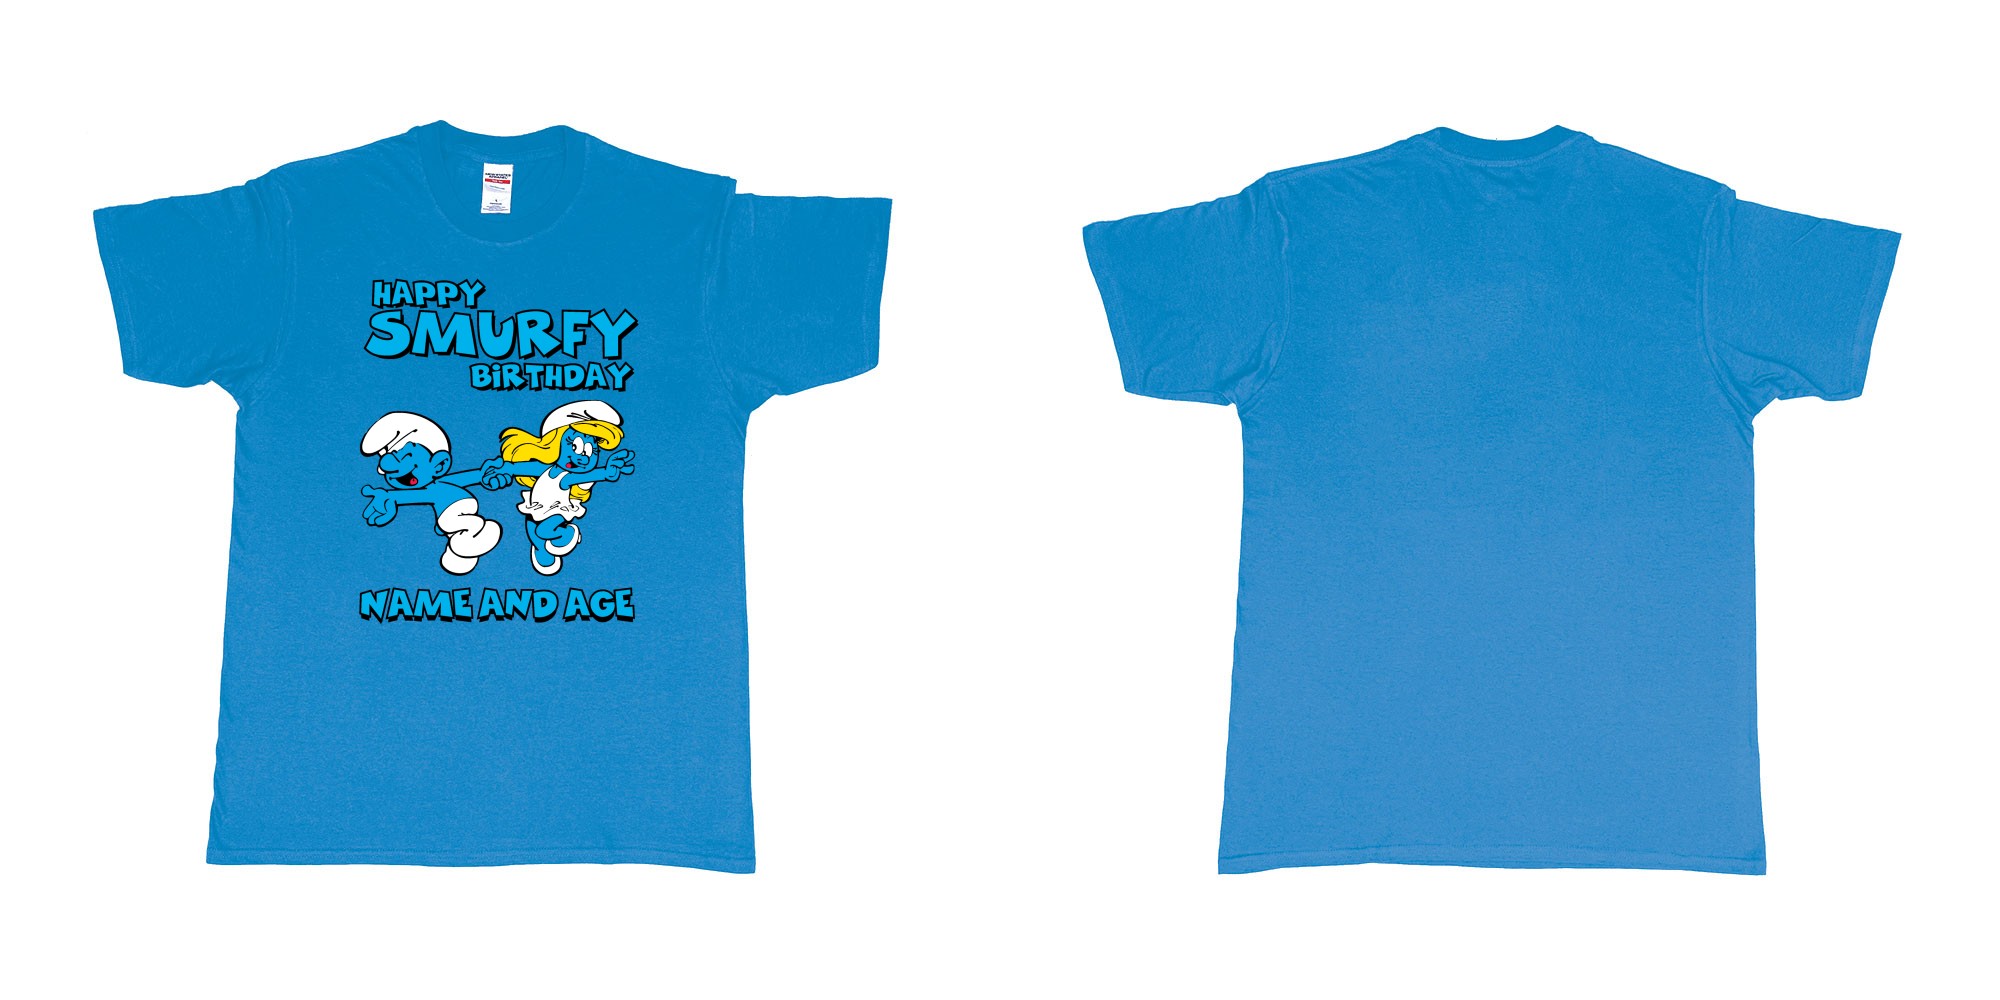 Custom tshirt design happy smurfy birthday in fabric color sapphire choice your own text made in Bali by The Pirate Way